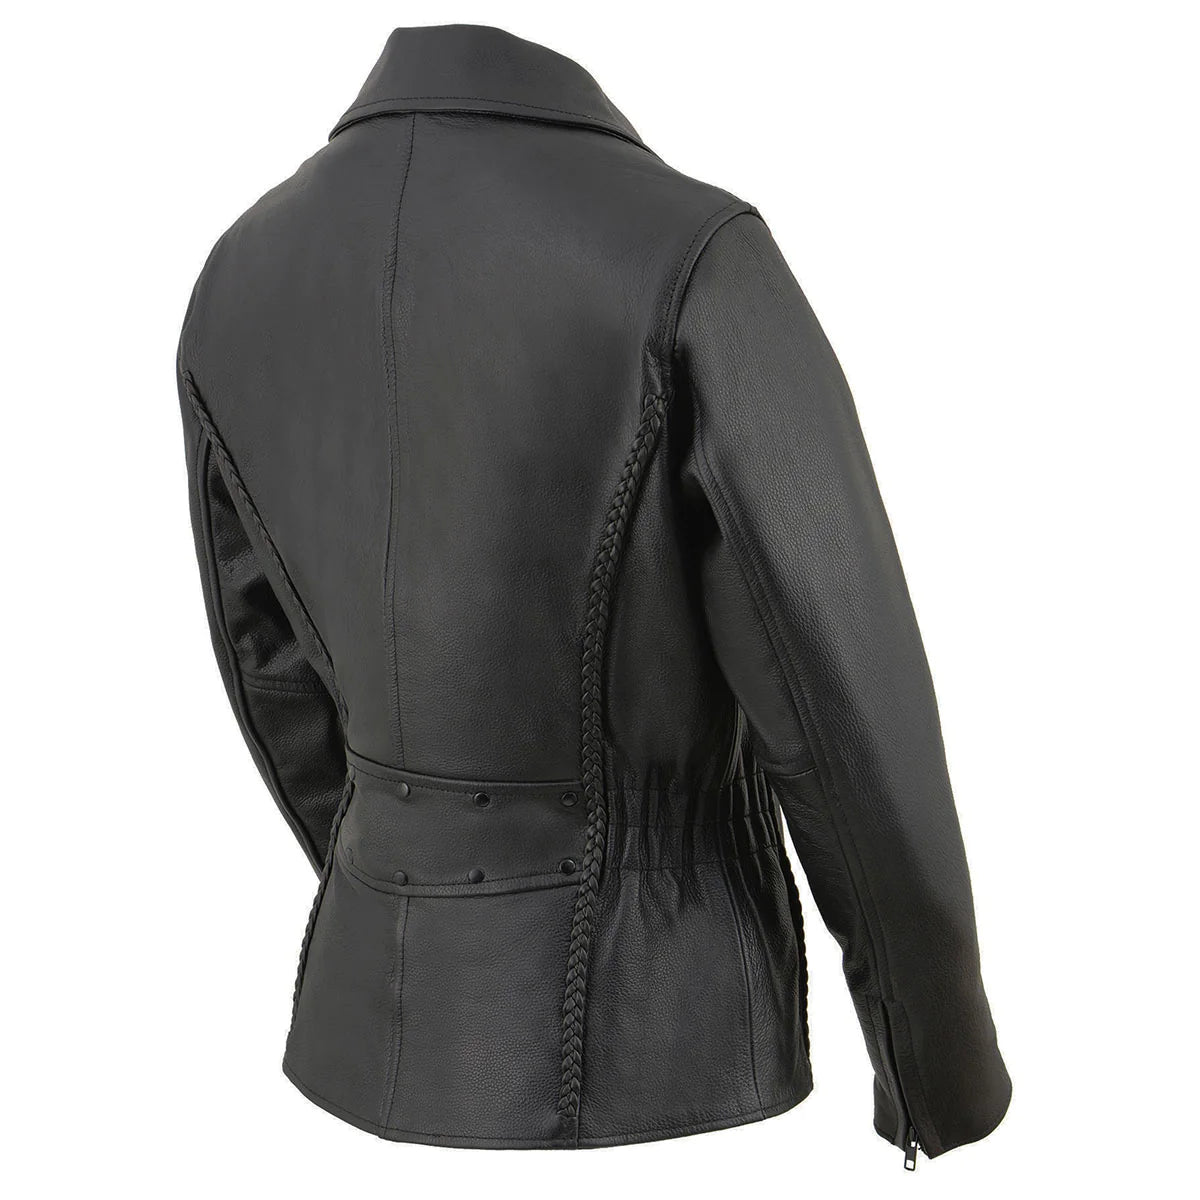 Women's Black Braided Leather Jacket with Stud Back Detailing